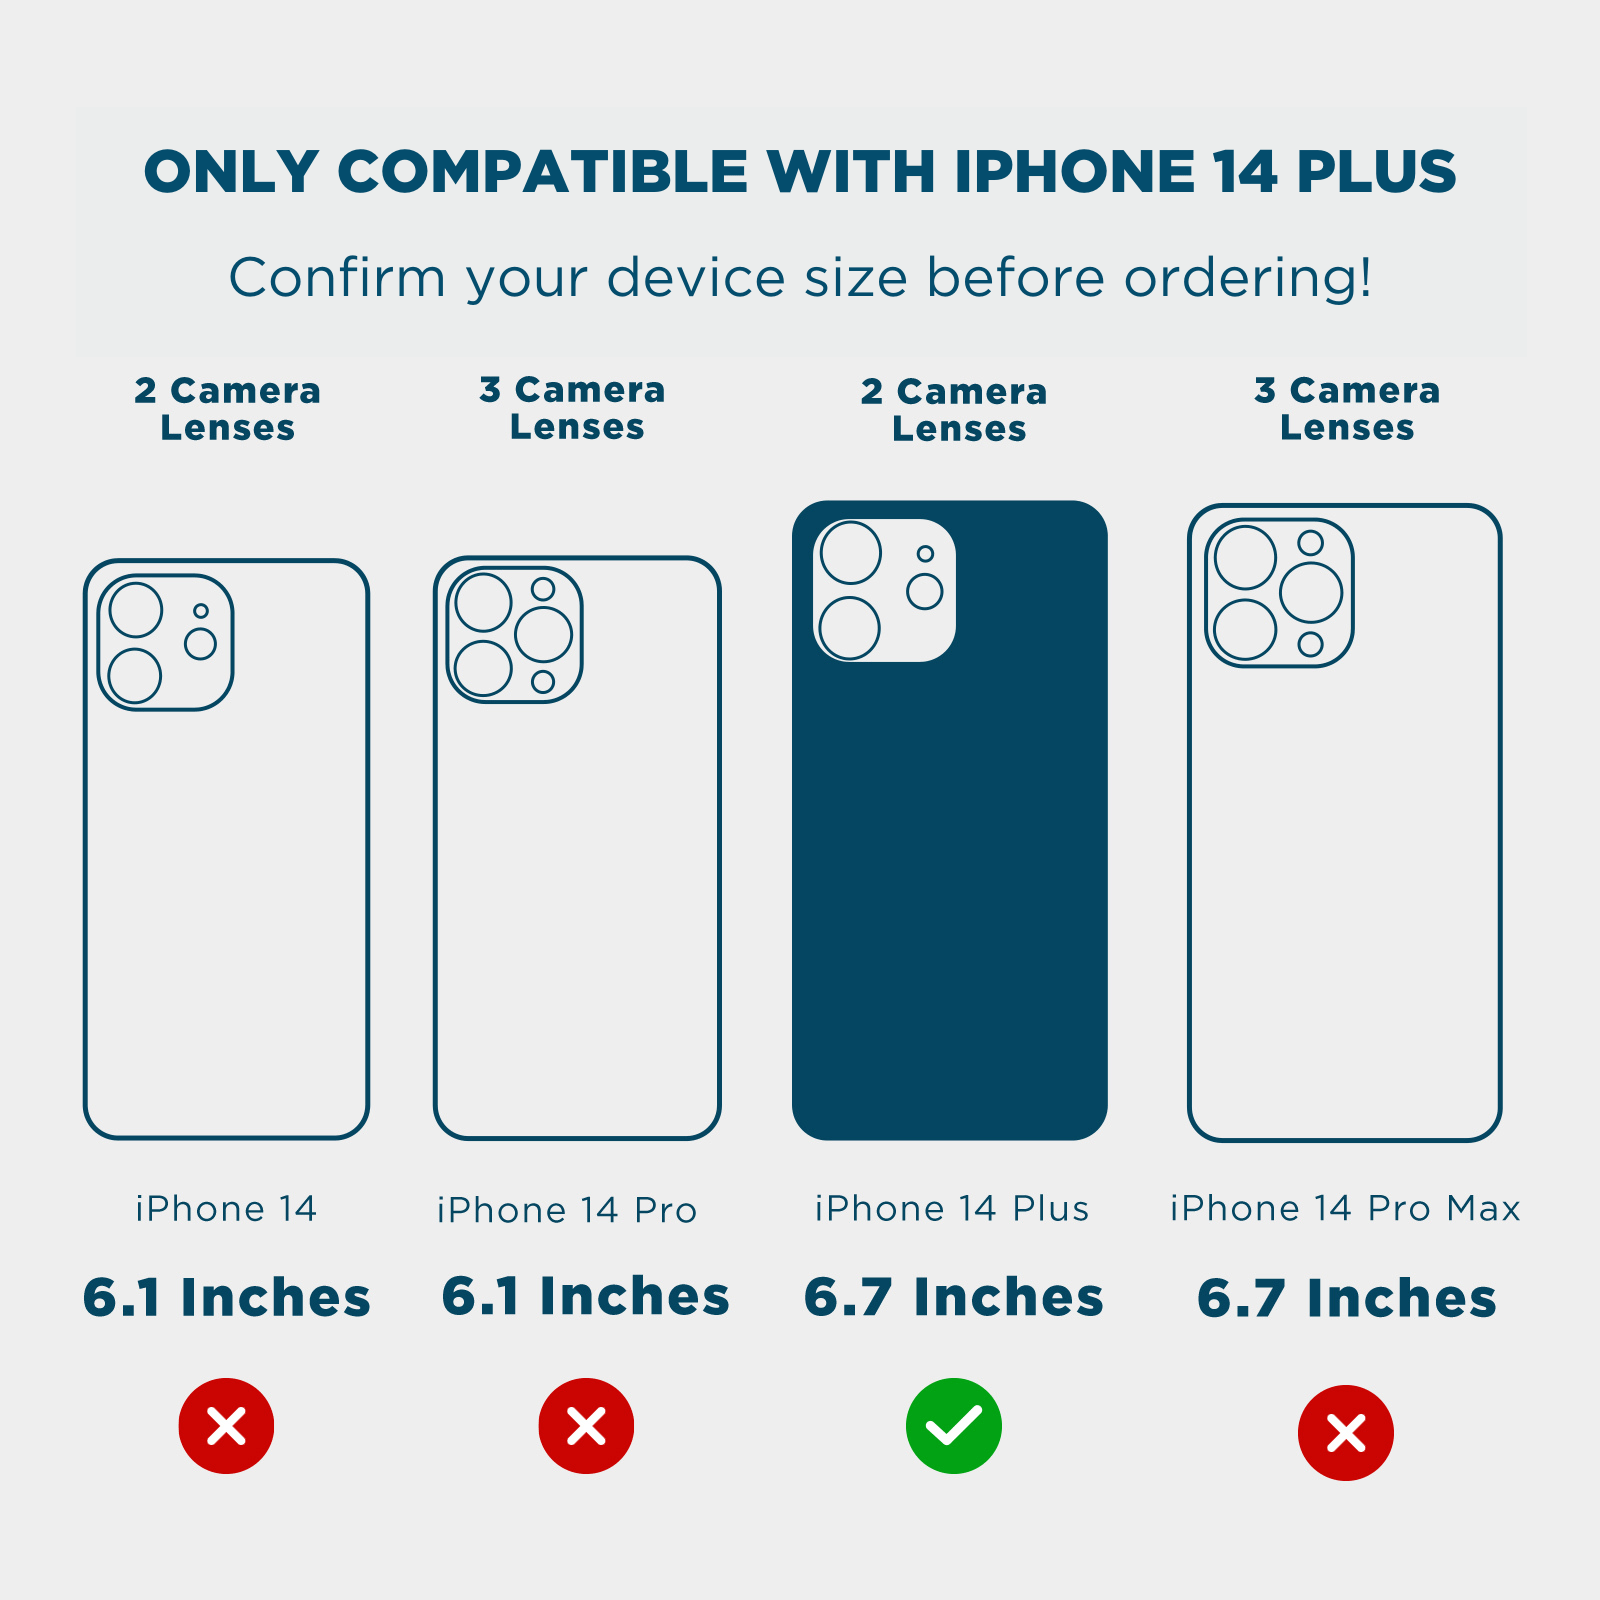 ONLY COMPATIBLE WITH IPHONE 14 PLUS. CONFIRM YOUR DEVICE SIZE BEFORE ORDERING! 2 CAMERA LENSES, 3 CAMERA LENSES, 2 CAMERA LENSES, 3 CAMERA LENSES, 6.1 INCHEC, 6.1 INCHES, 6.7 INCHES, 6.7 INCHES. COLOR::FLORAL GEMS